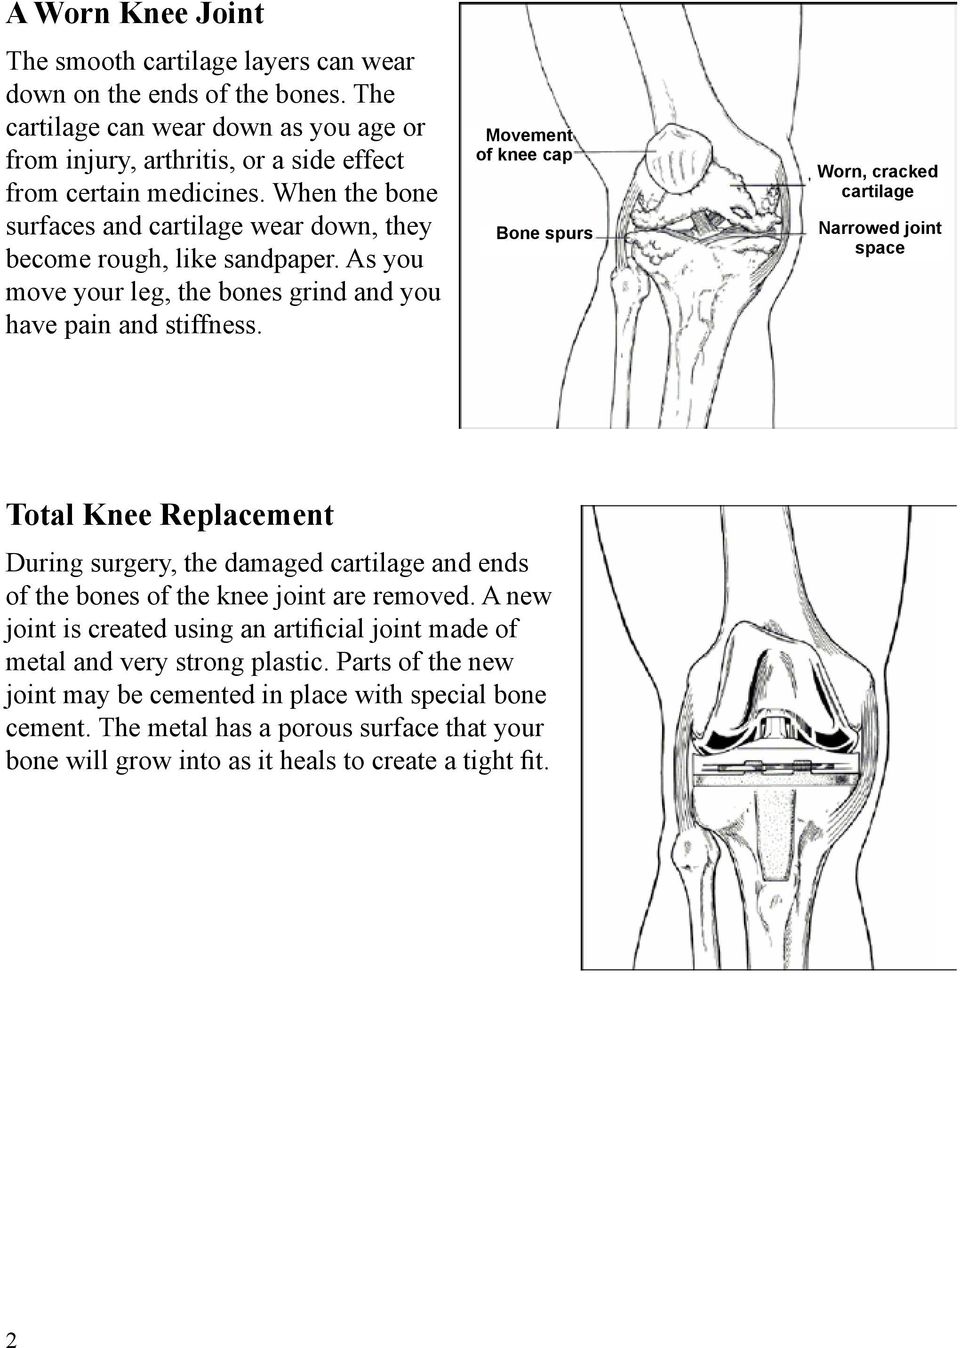 Movement of knee cap Bone spurs Worn, cracked cartilage Narrowed joint space Total Knee Replacement During surgery, the damaged cartilage and ends of the bones of the knee joint are removed.